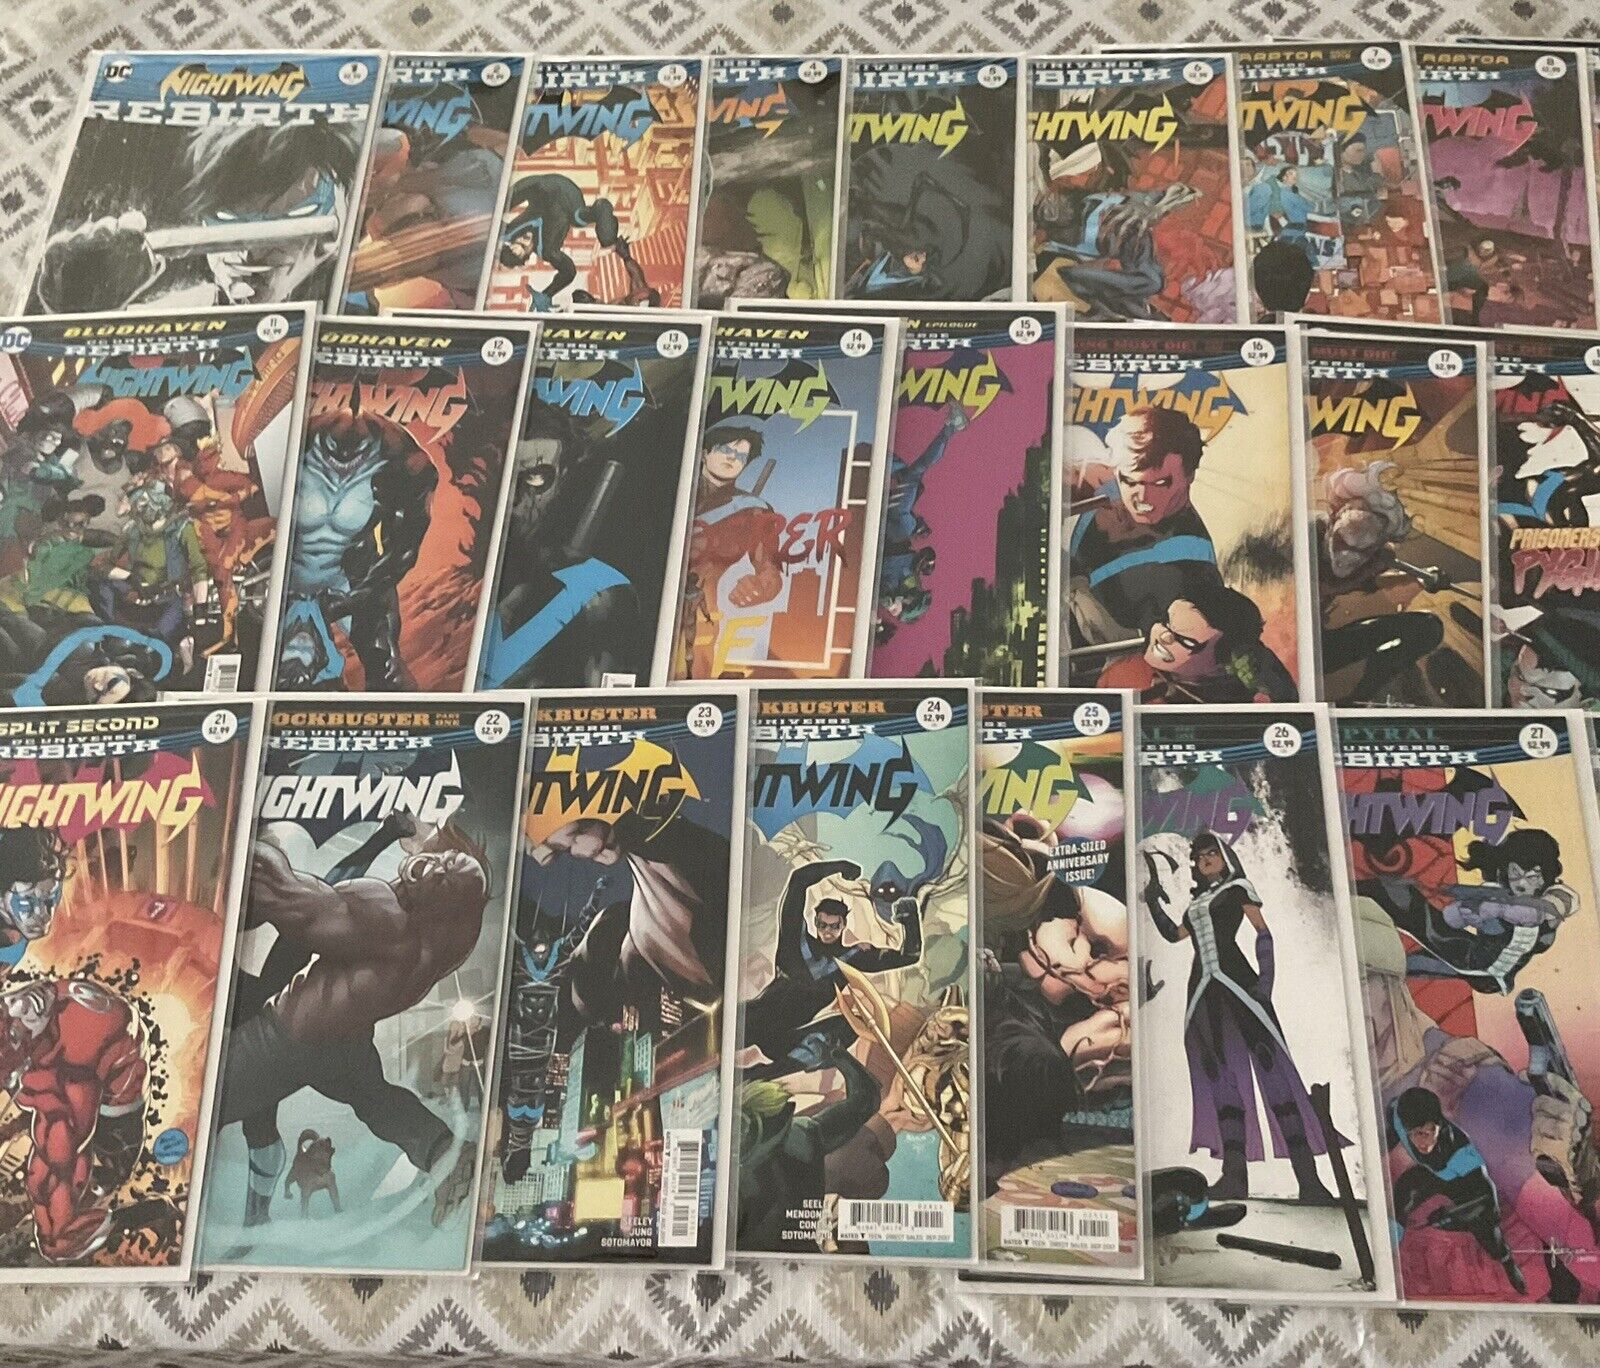 NIGHTWING REBIRTH # 1-30 LOT (Tim Seeley) DC 2016 MINT CONDITION